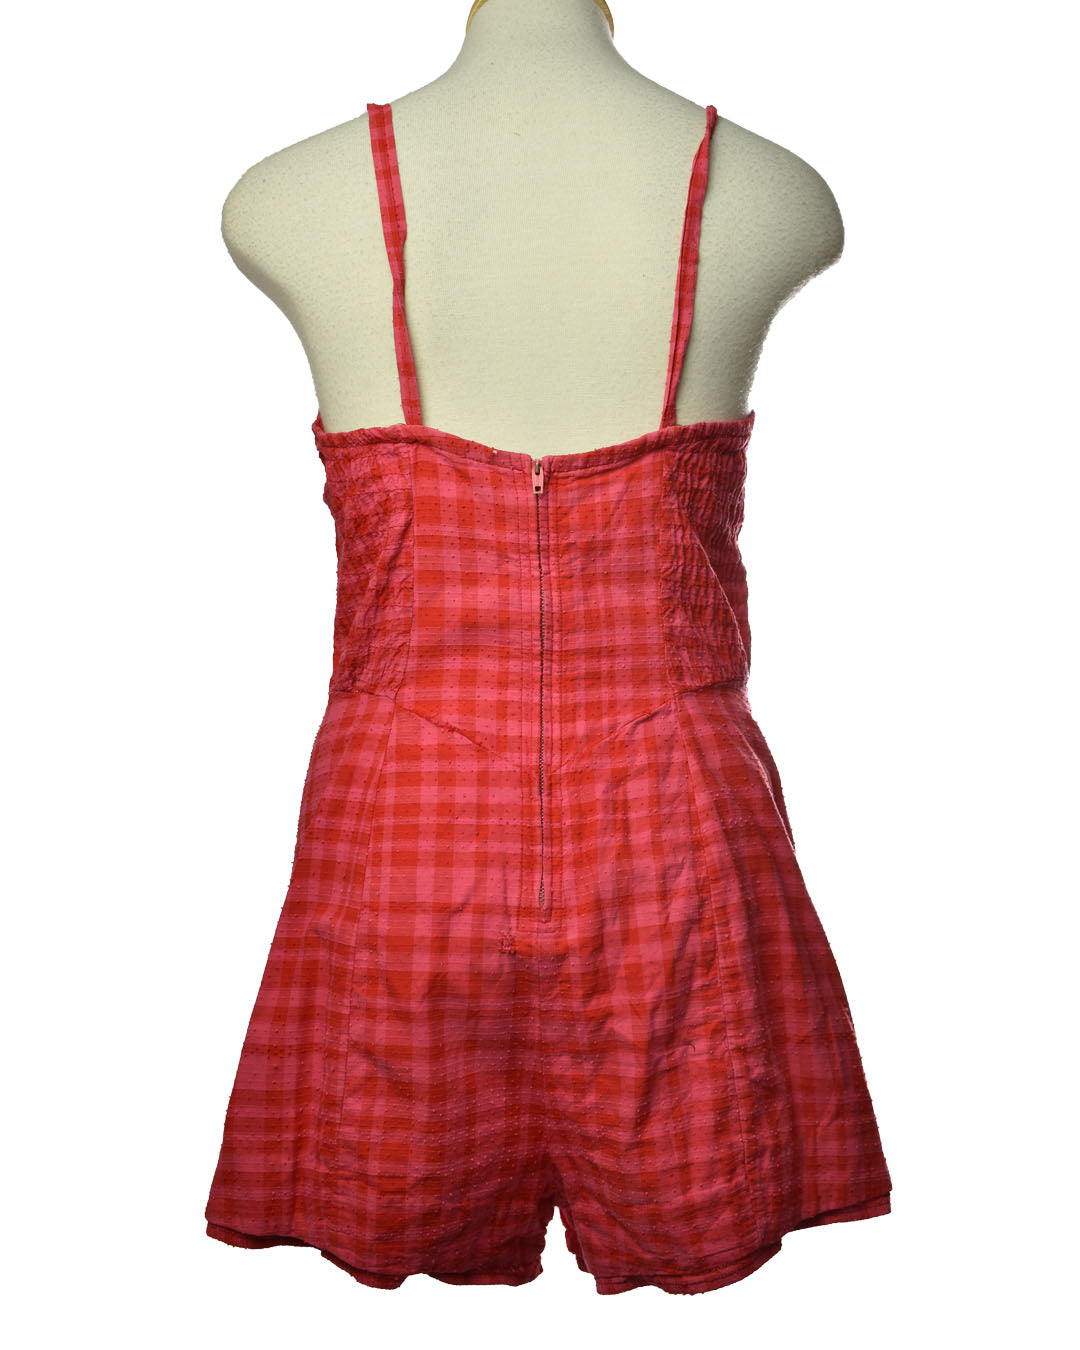 Vintage 50s Playsuit Plaid Cotton Swimsuit by Catalina Pin Up Romper